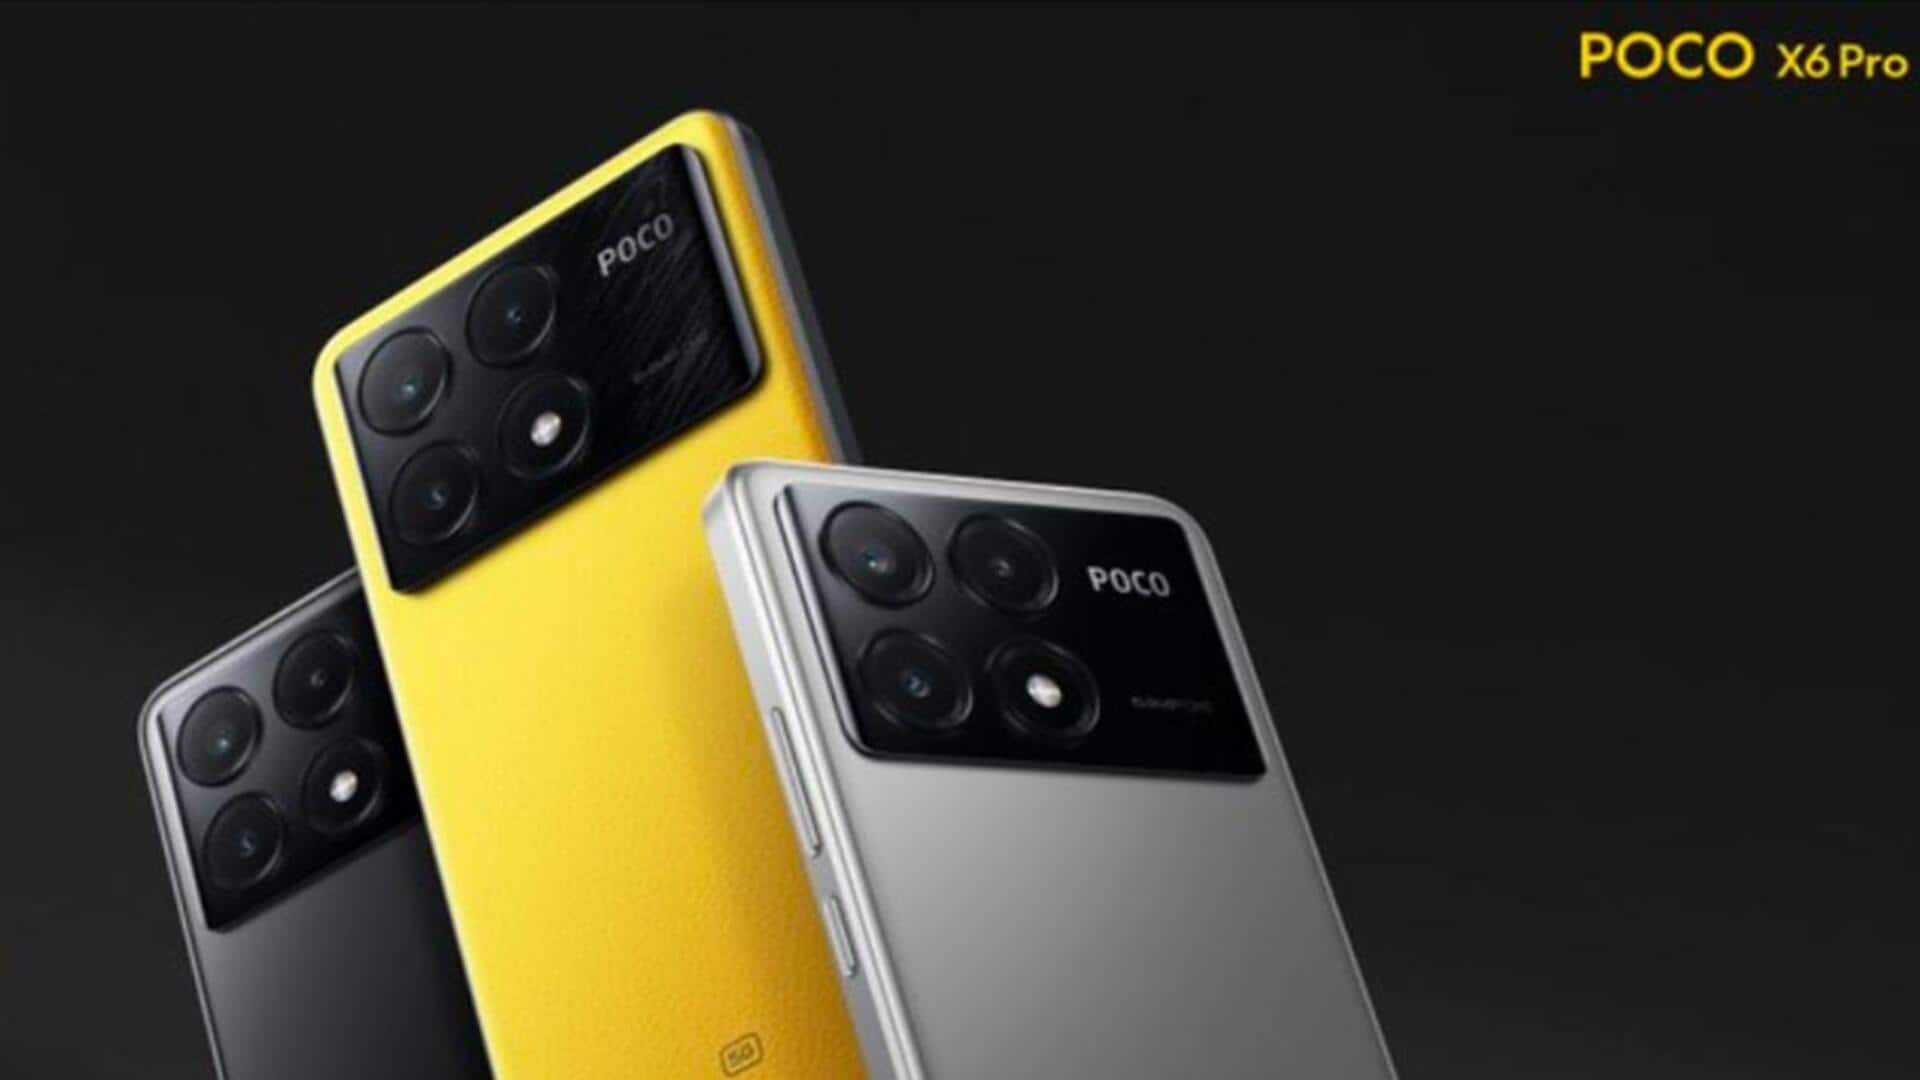 POCO launches X6 and X6 Pro smartphones in India